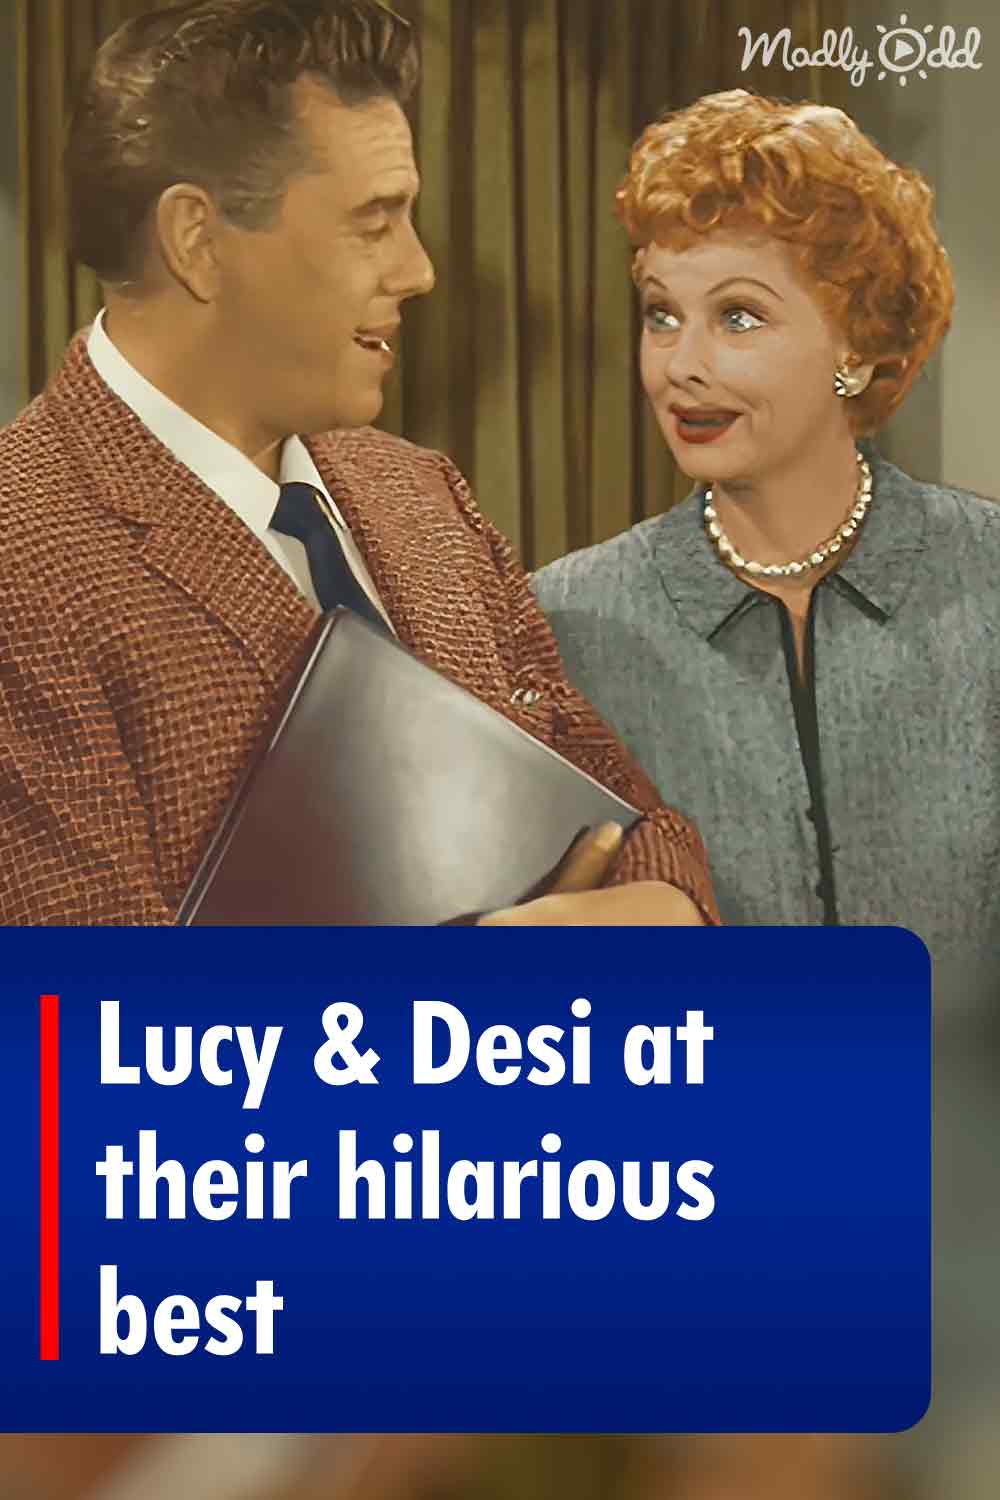 Lucy & Desi at their hilarious best